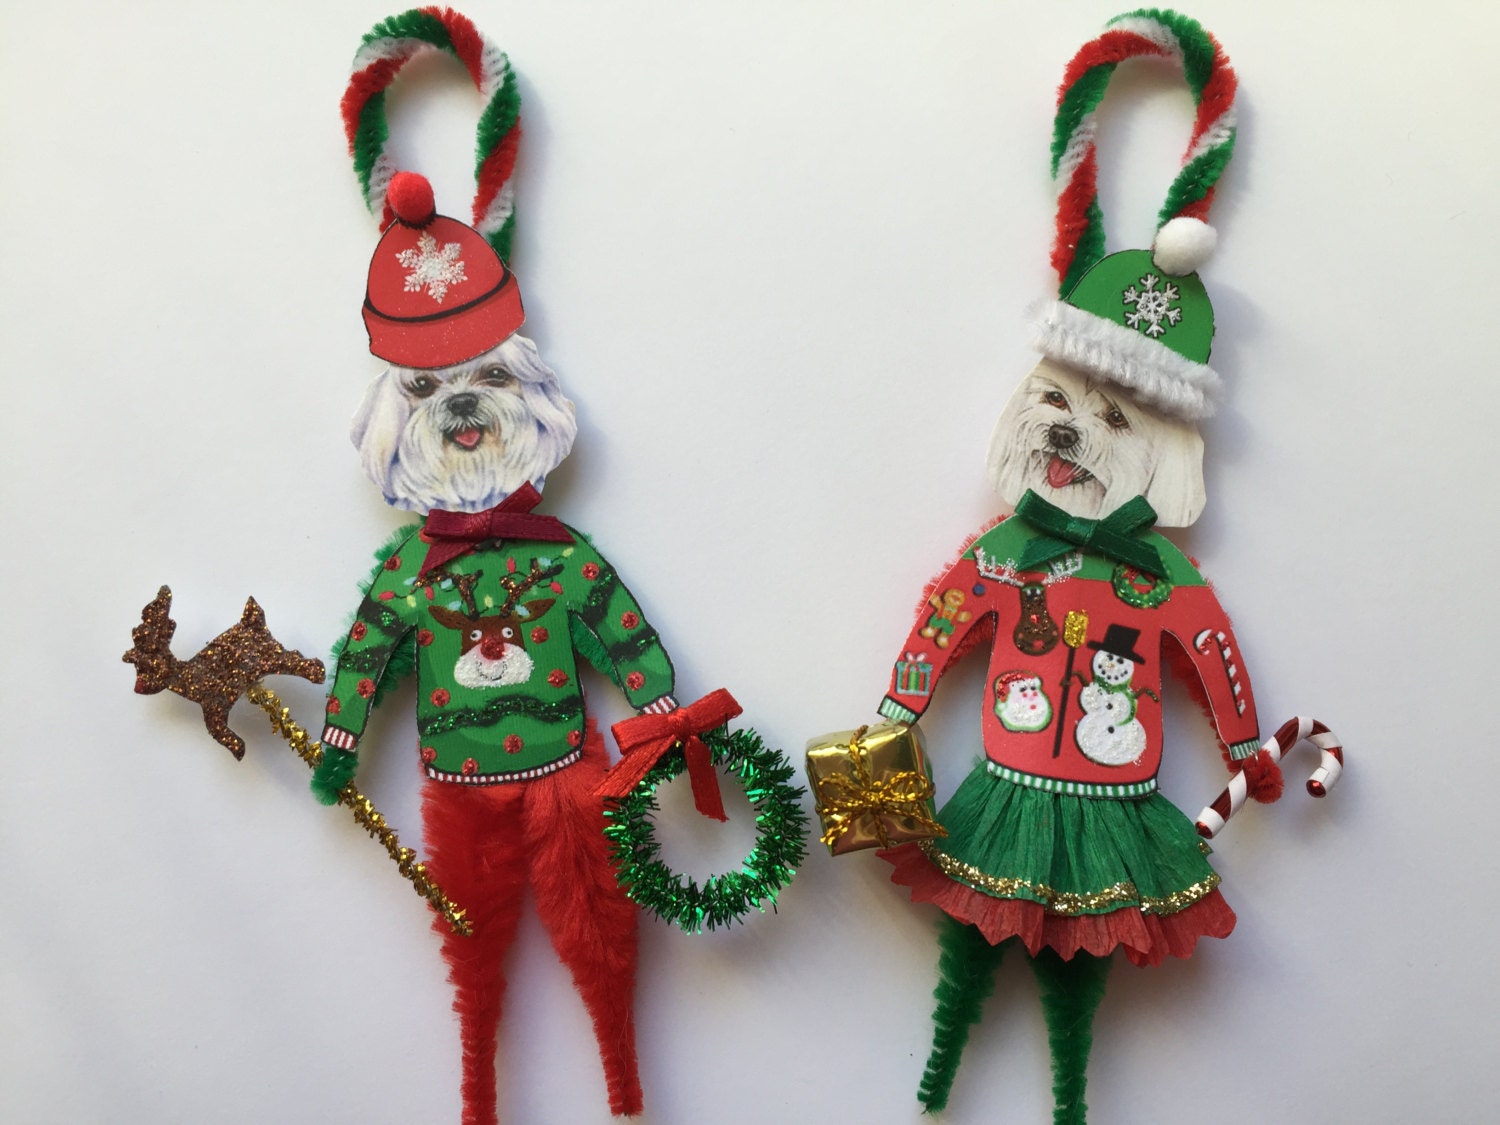 Maltese CHRISTMAS ornaments UGLY SWEATER dog ornaments vintage